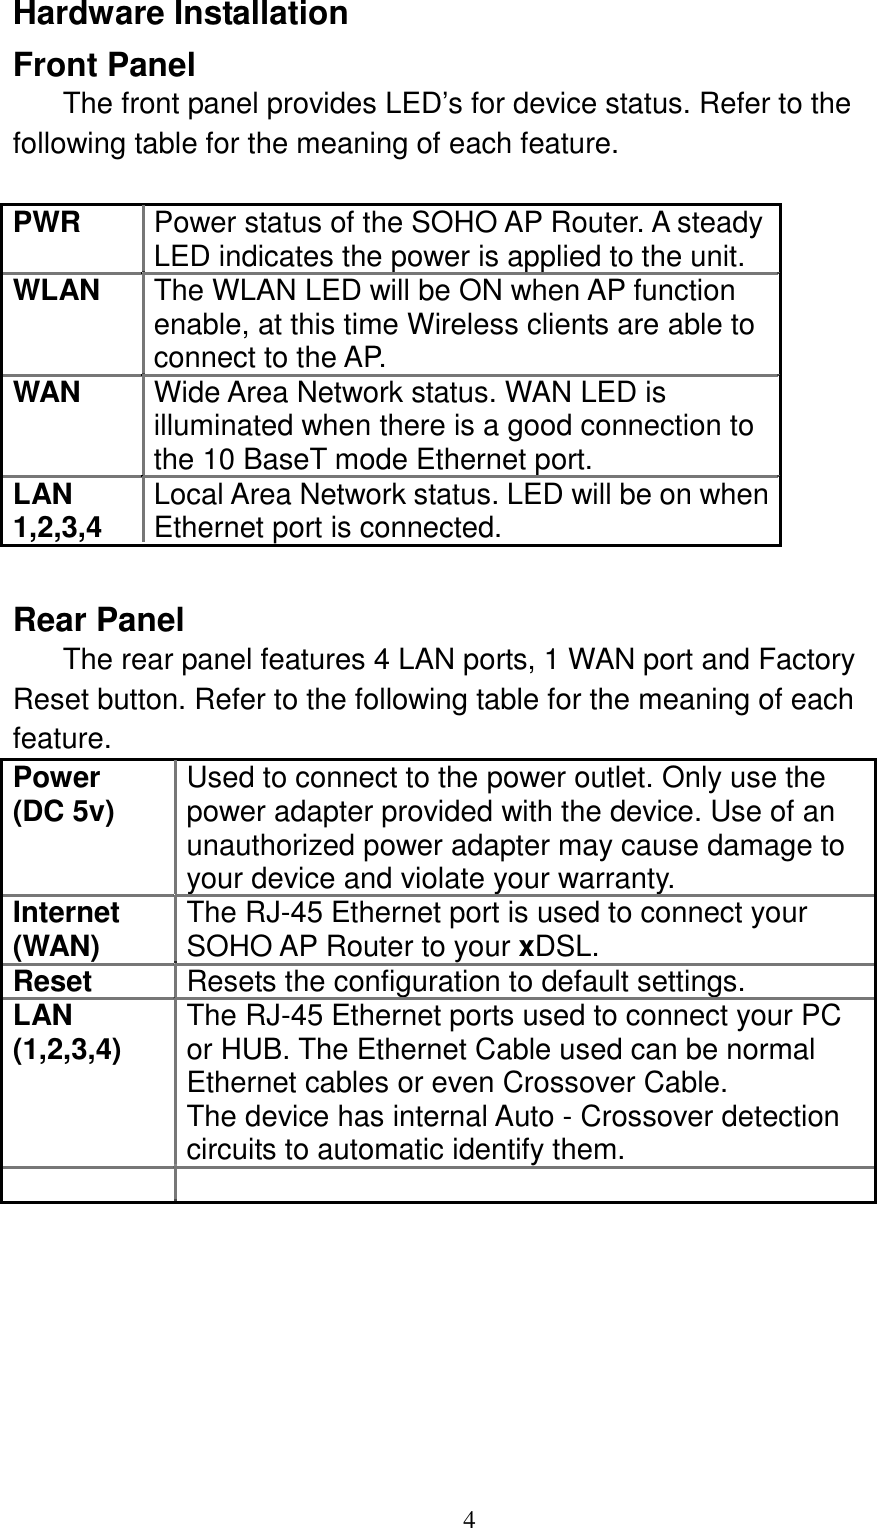 4Hardware InstallationFront PanelThe front panel provides LED’s for device status. Refer to thefollowing table for the meaning of each feature.PWR Power status of the SOHO AP Router. A steadyLED indicates the power is applied to the unit.WLAN The WLAN LED will be ON when AP functionenable, at this time Wireless clients are able toconnect to the AP.WAN Wide Area Network status. WAN LED isilluminated when there is a good connection tothe 10 BaseT mode Ethernet port.LAN1,2,3,4 Local Area Network status. LED will be on whenEthernet port is connected.Rear PanelThe rear panel features 4 LAN ports, 1 WAN port and FactoryReset button. Refer to the following table for the meaning of eachfeature.Power(DC 5v) Used to connect to the power outlet. Only use thepower adapter provided with the device. Use of anunauthorized power adapter may cause damage toyour device and violate your warranty.Internet(WAN) The RJ-45 Ethernet port is used to connect yourSOHO AP Router to your xDSL.Reset Resets the configuration to default settings.LAN(1,2,3,4) The RJ-45 Ethernet ports used to connect your PCor HUB. The Ethernet Cable used can be normalEthernet cables or even Crossover Cable.The device has internal Auto - Crossover detectioncircuits to automatic identify them.